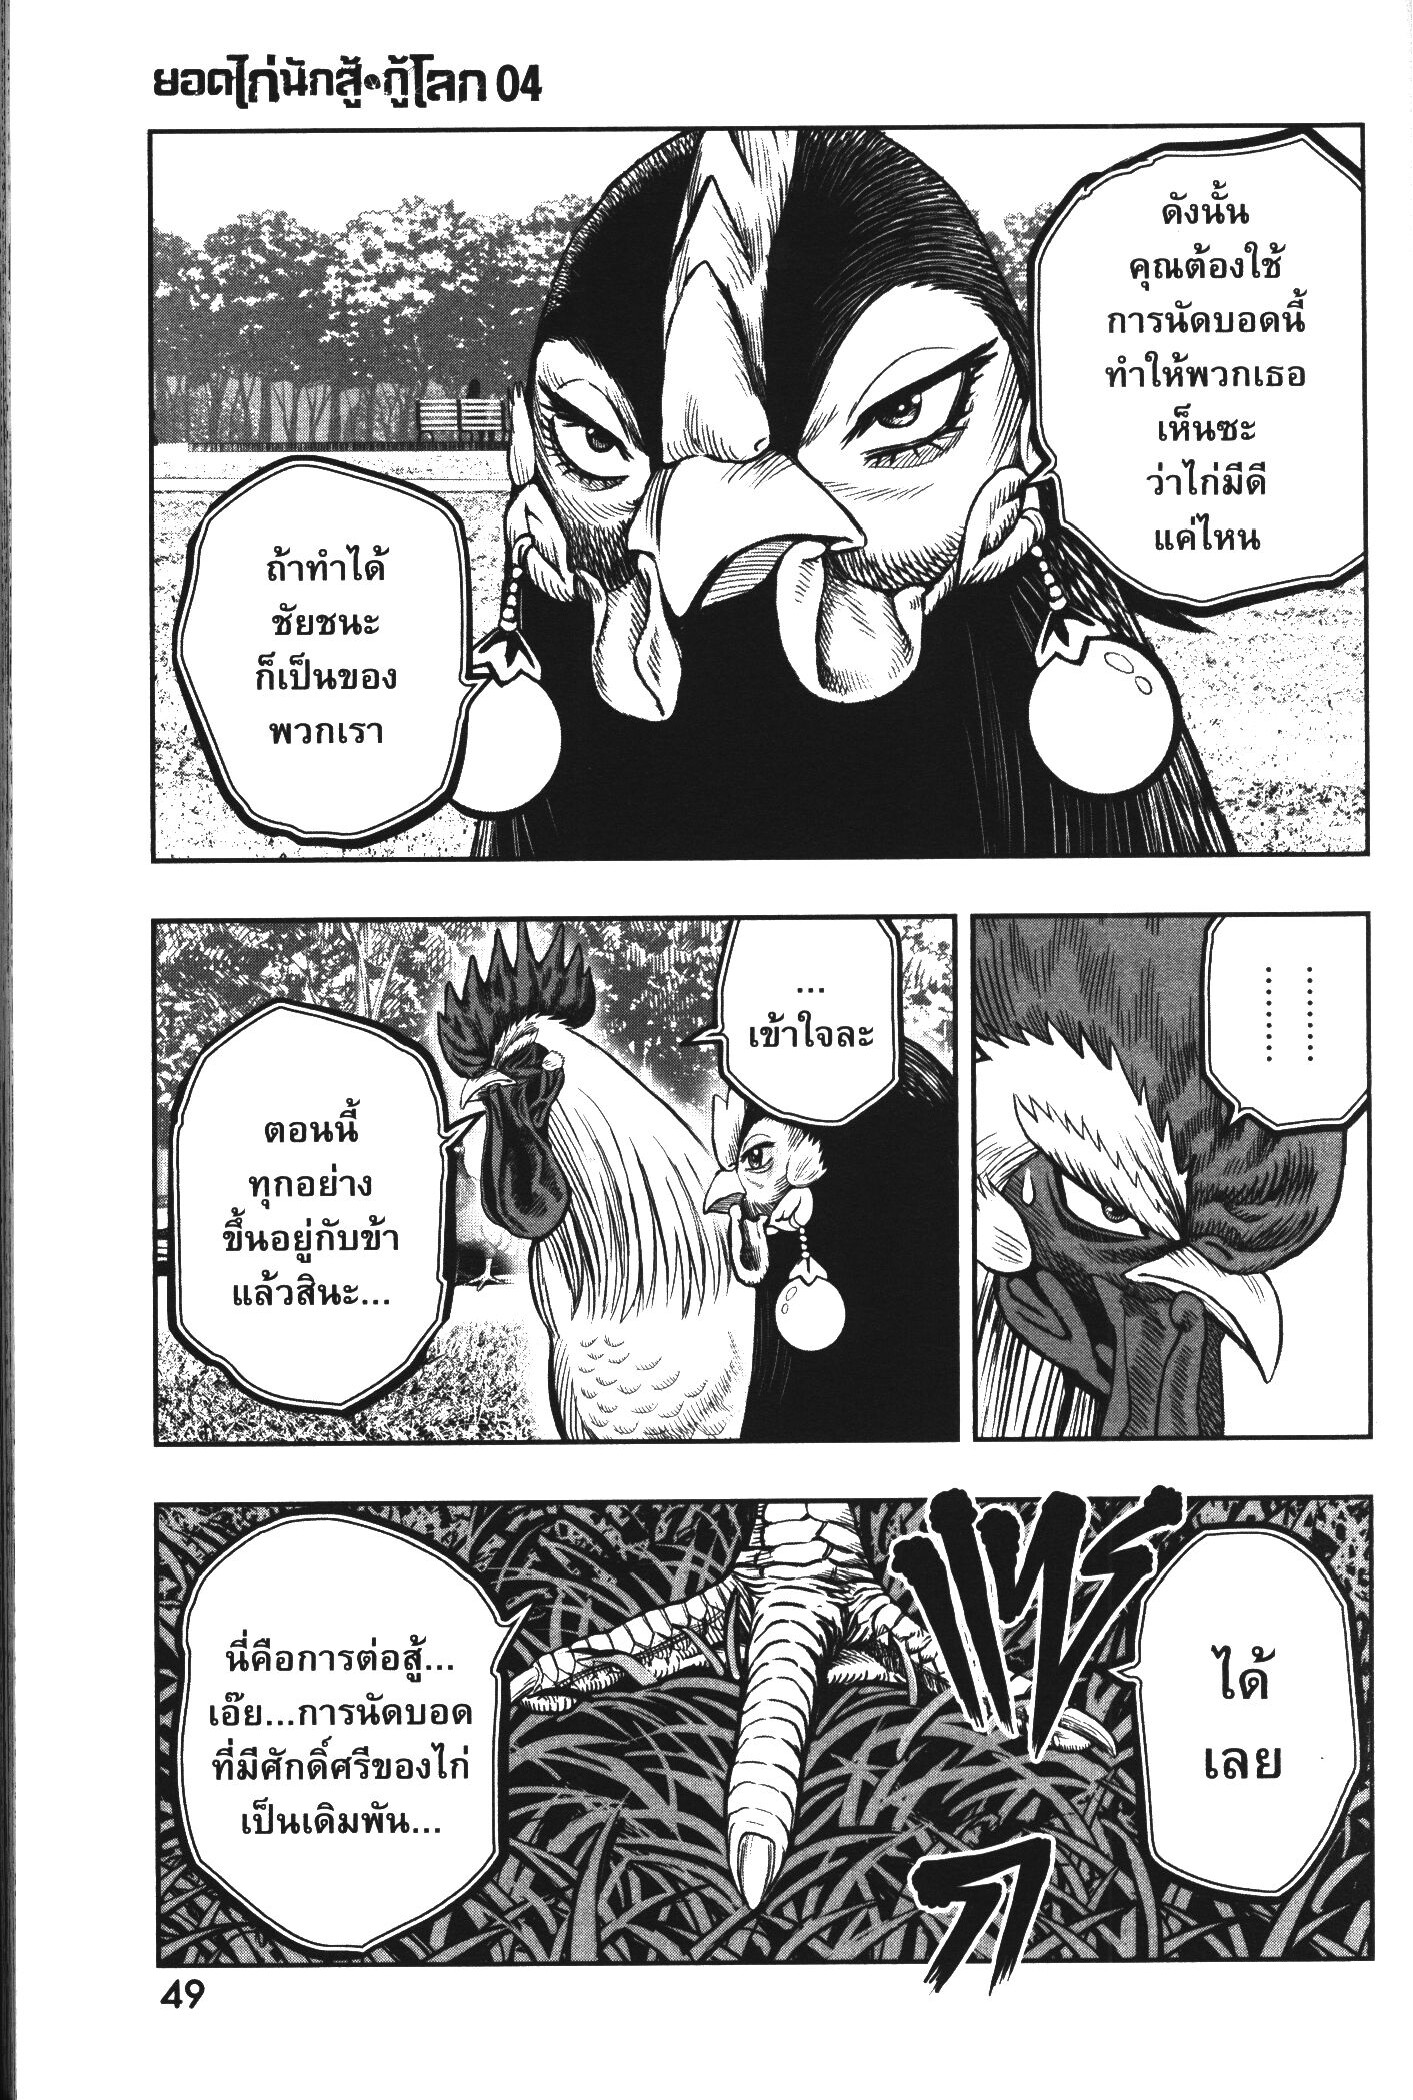 Rooster Fighter 17 (21)